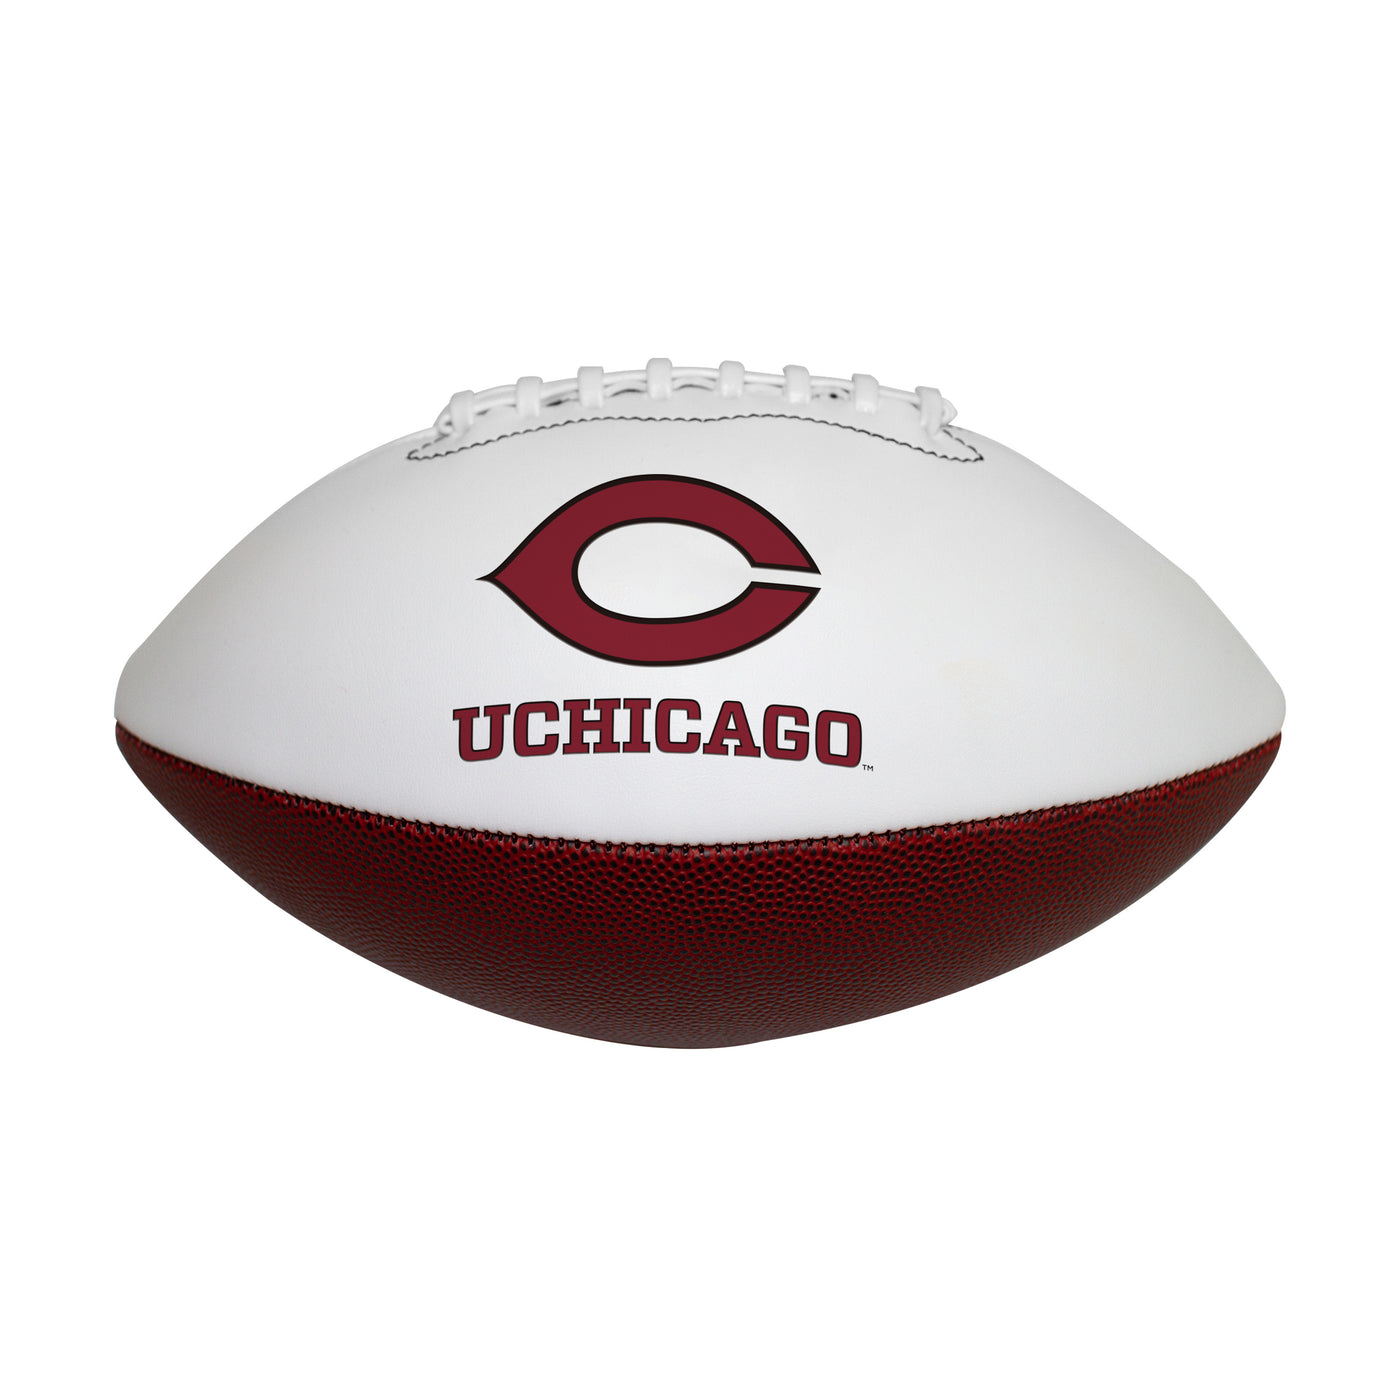 Univ of Chicago Full Size Autograph Football